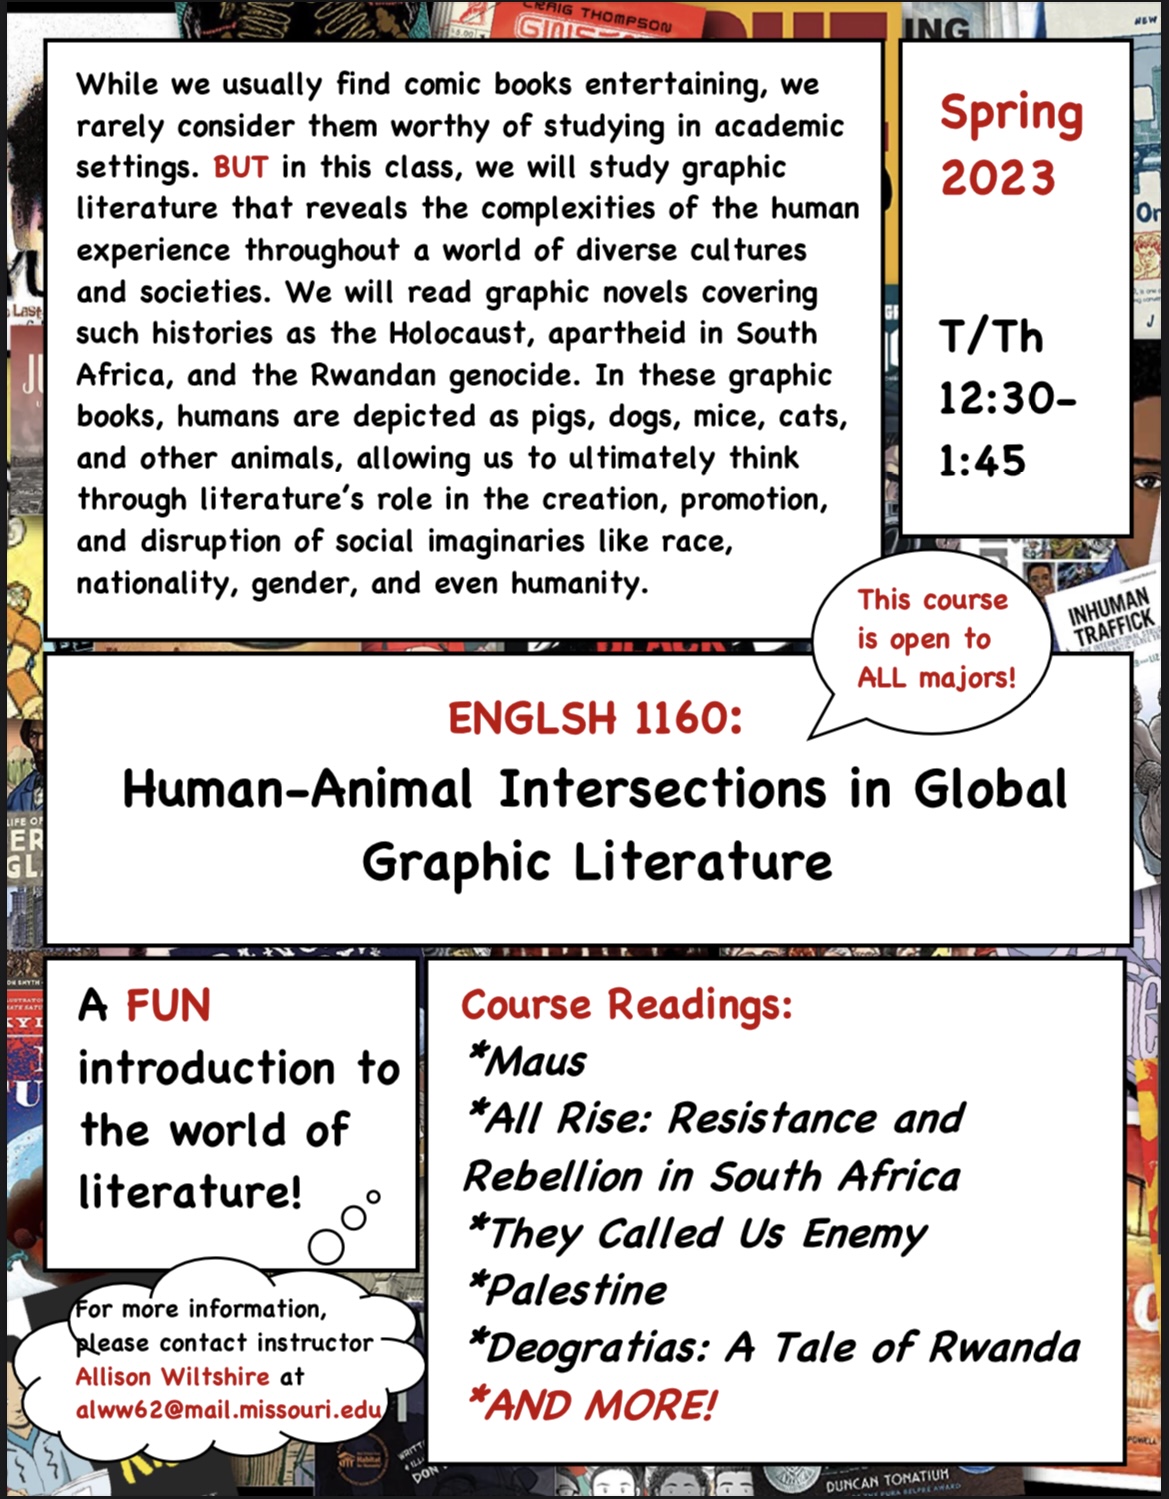 Course flyer for 1160: Global Graphic Literature